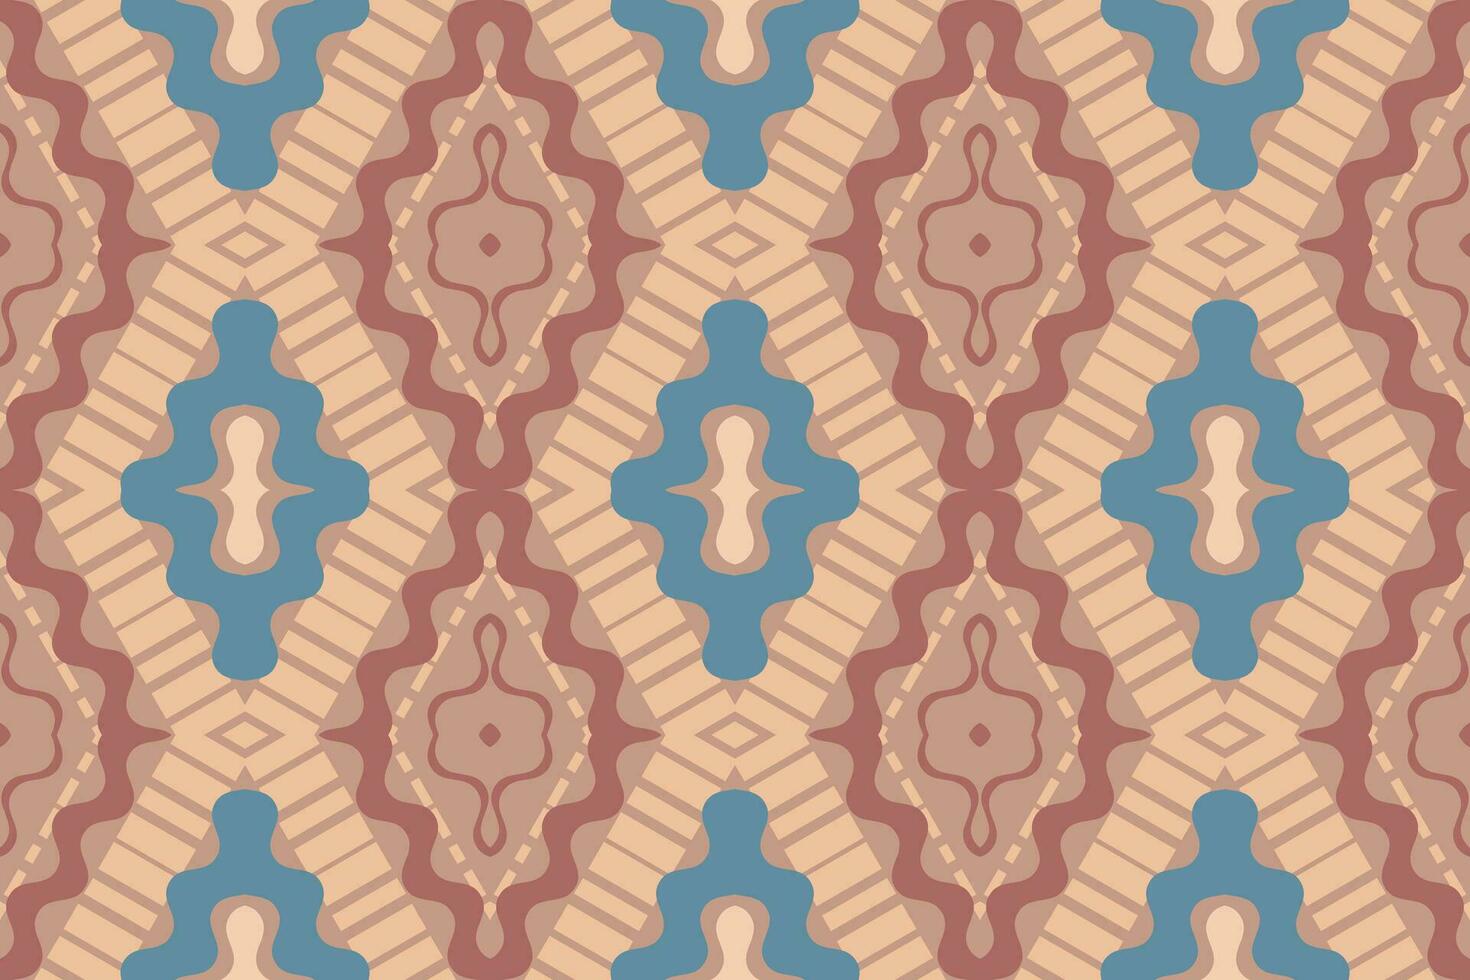 Ikat Damask Paisley Embroidery Background. Ikat Prints Geometric Ethnic Oriental Pattern traditional.aztec Style Abstract Vector illustration.design for Texture,fabric,clothing,wrapping,sarong.